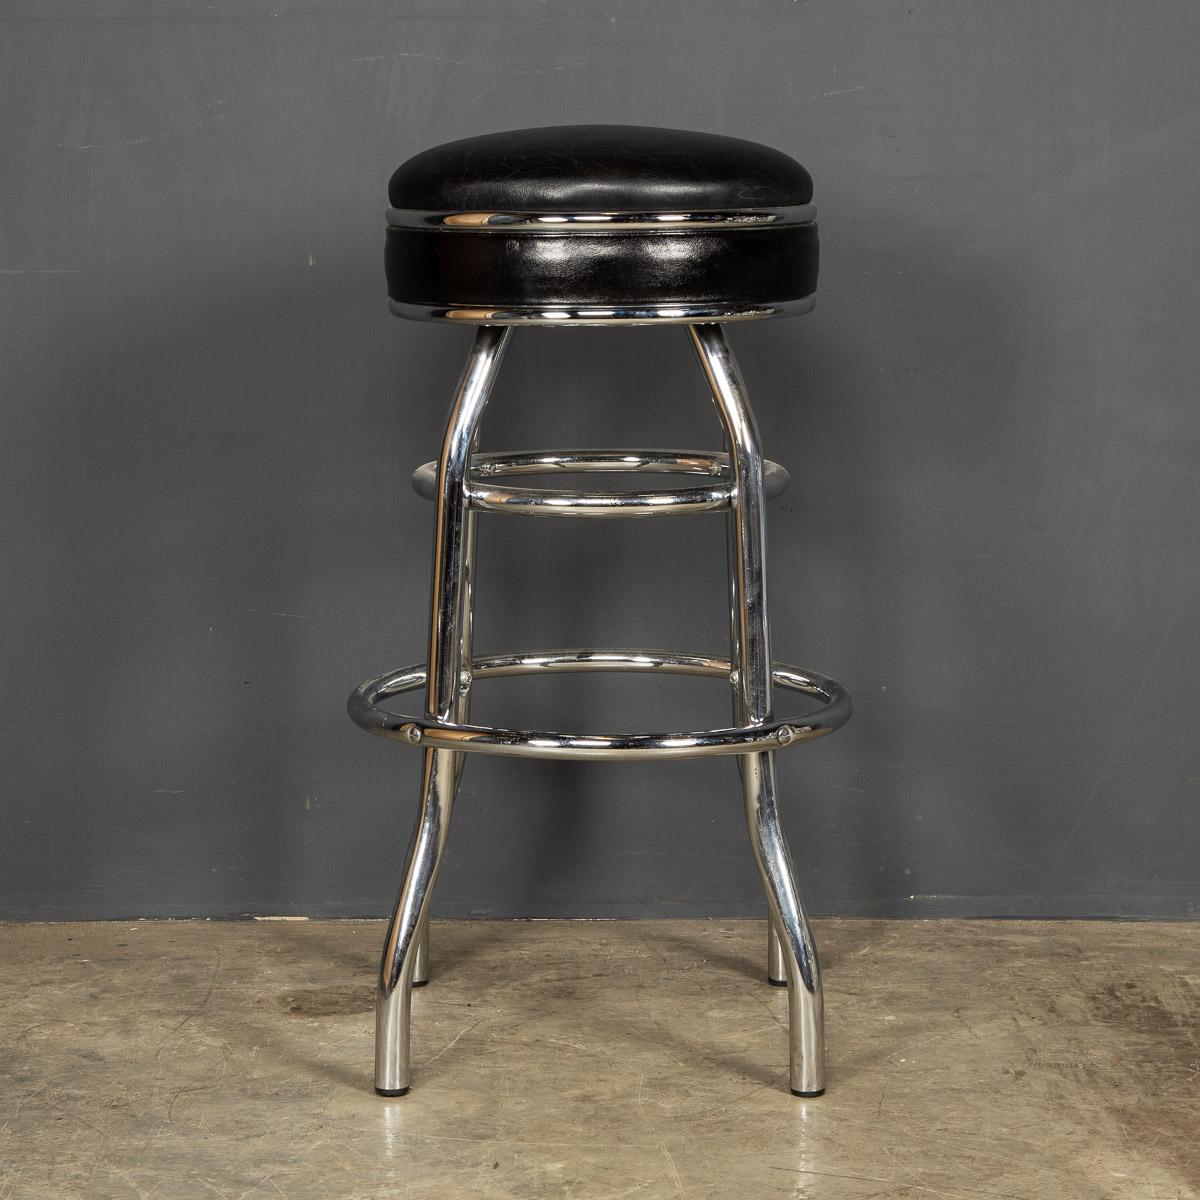 A mid 20th Century set of four leather and chrome swivel top bar stools straight from an iconic American diner.

Condition
In Great Condition - The leather has some wear consistent with age

Size
Height: 78cm
Depth: 50cm.